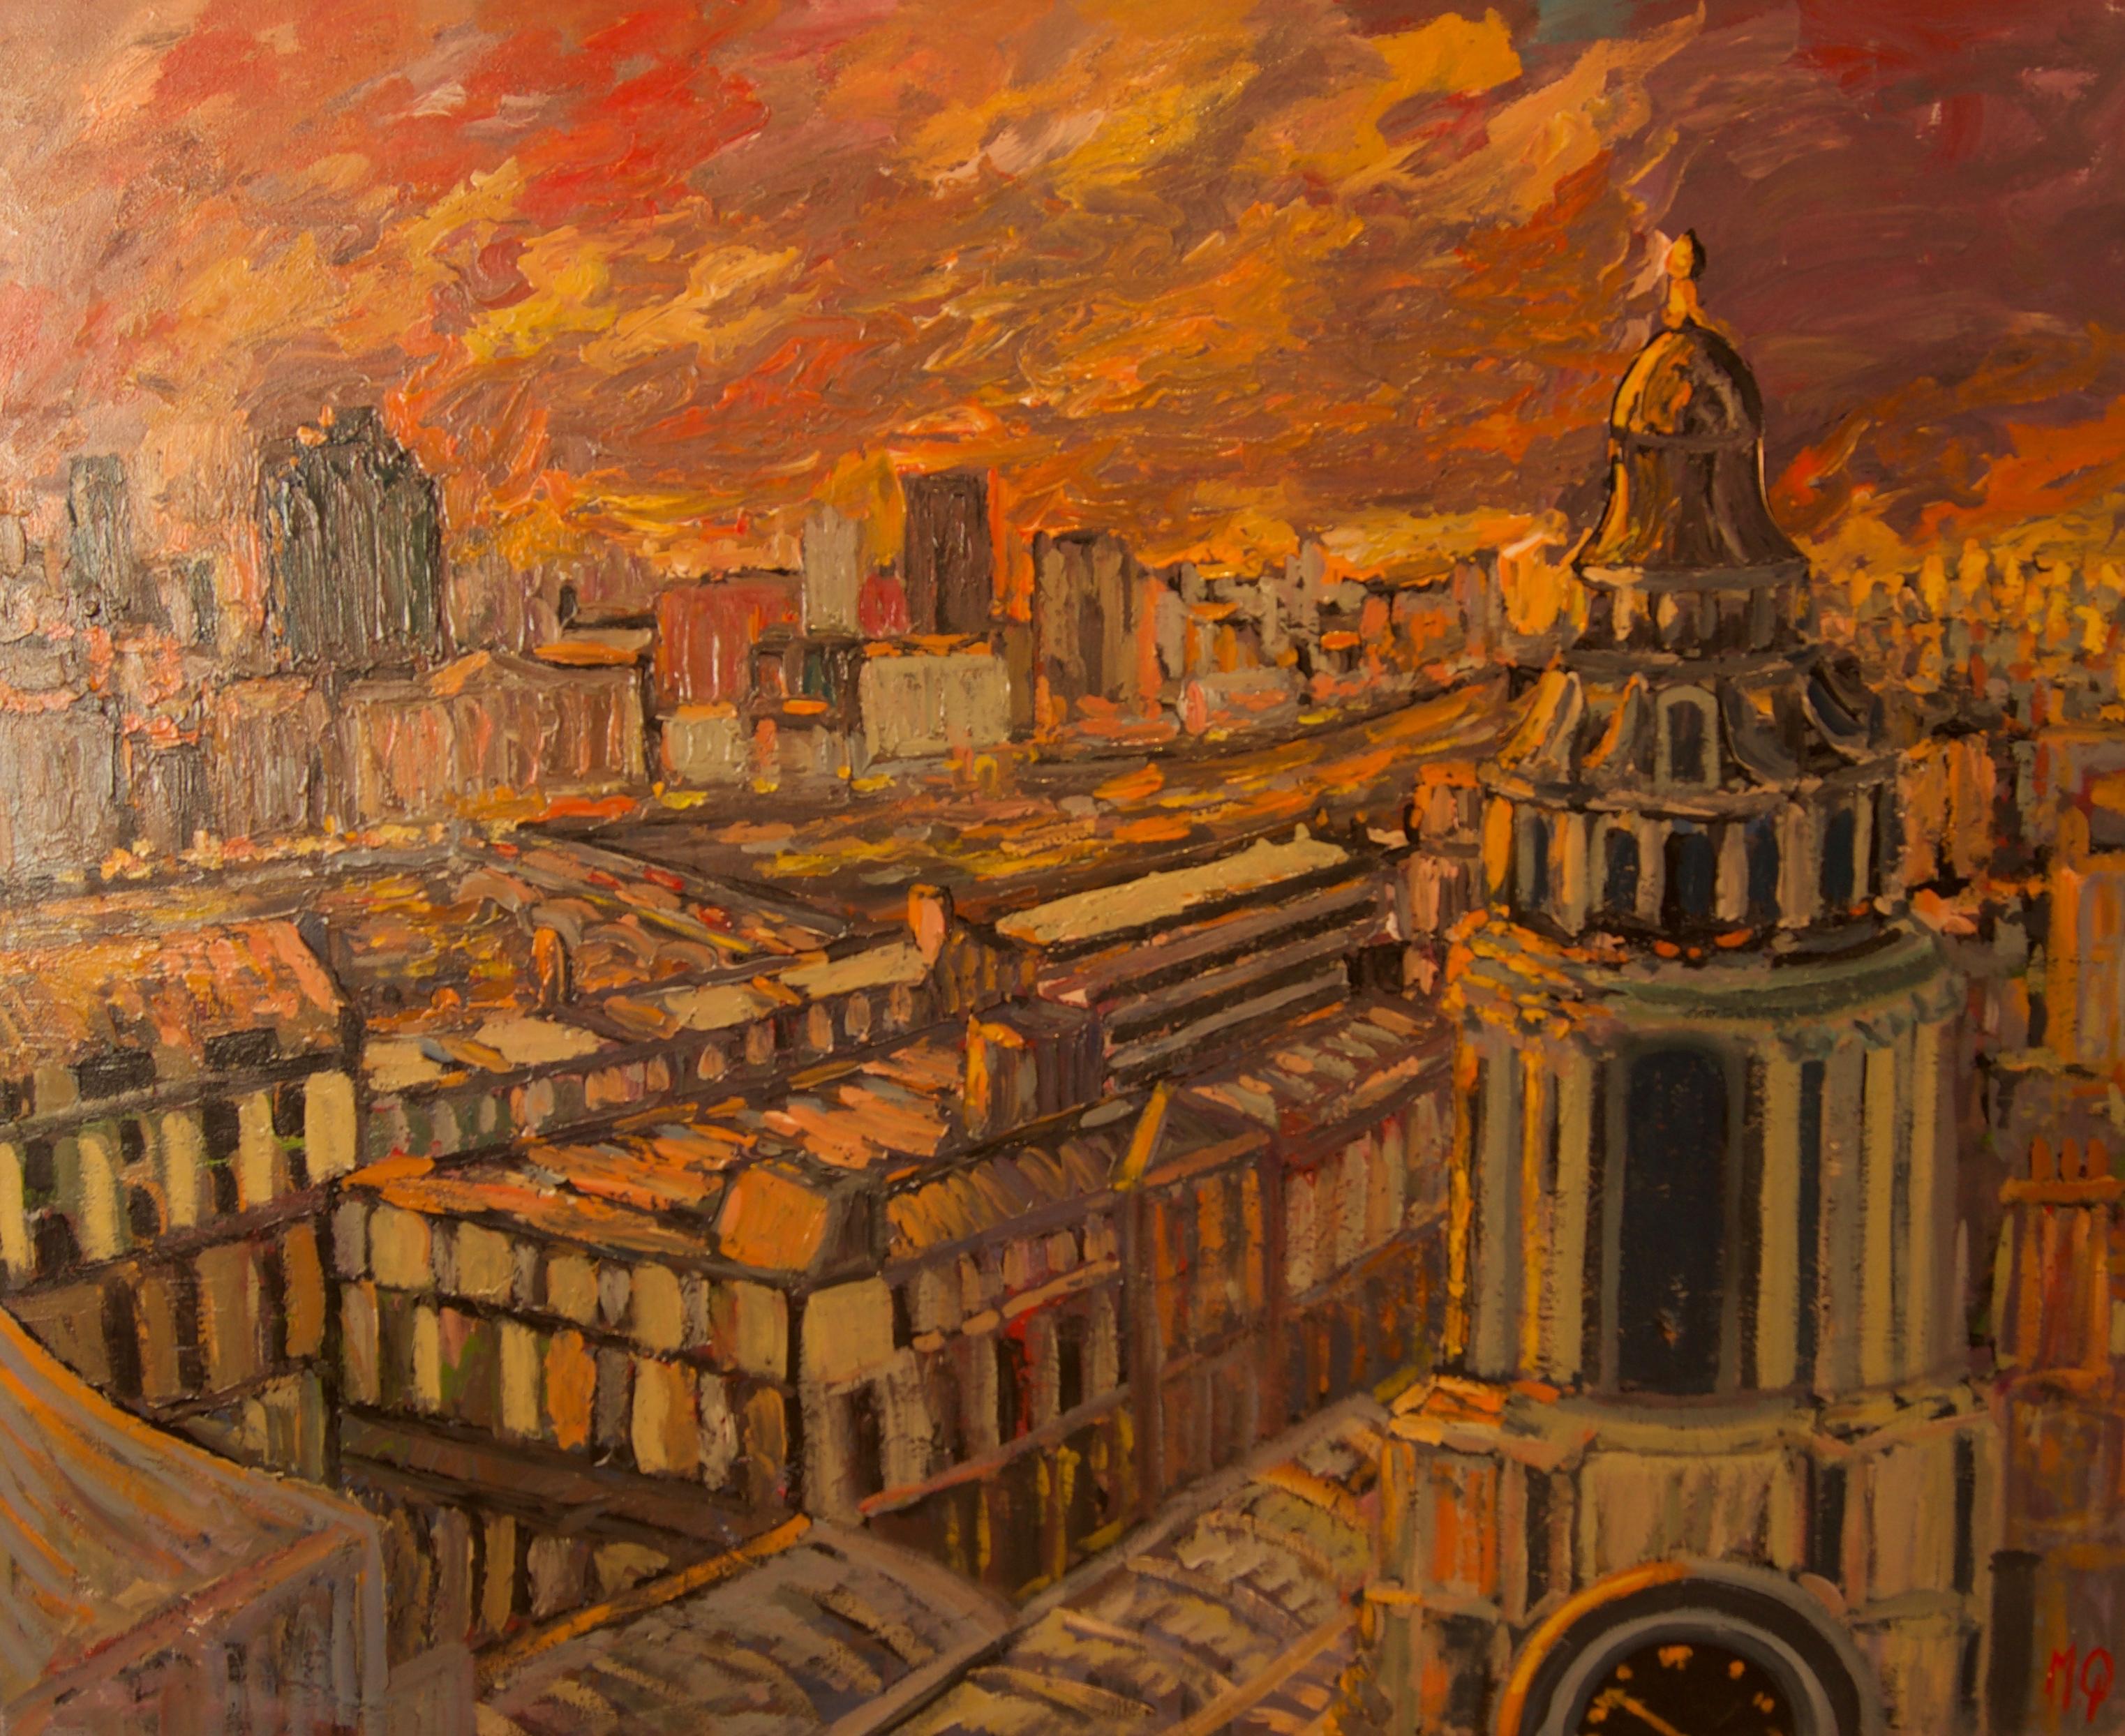 Michael Quirke Figurative Painting - Sunset over London - Late 20th Century Impressionist Acrylic Landscape - Quirke